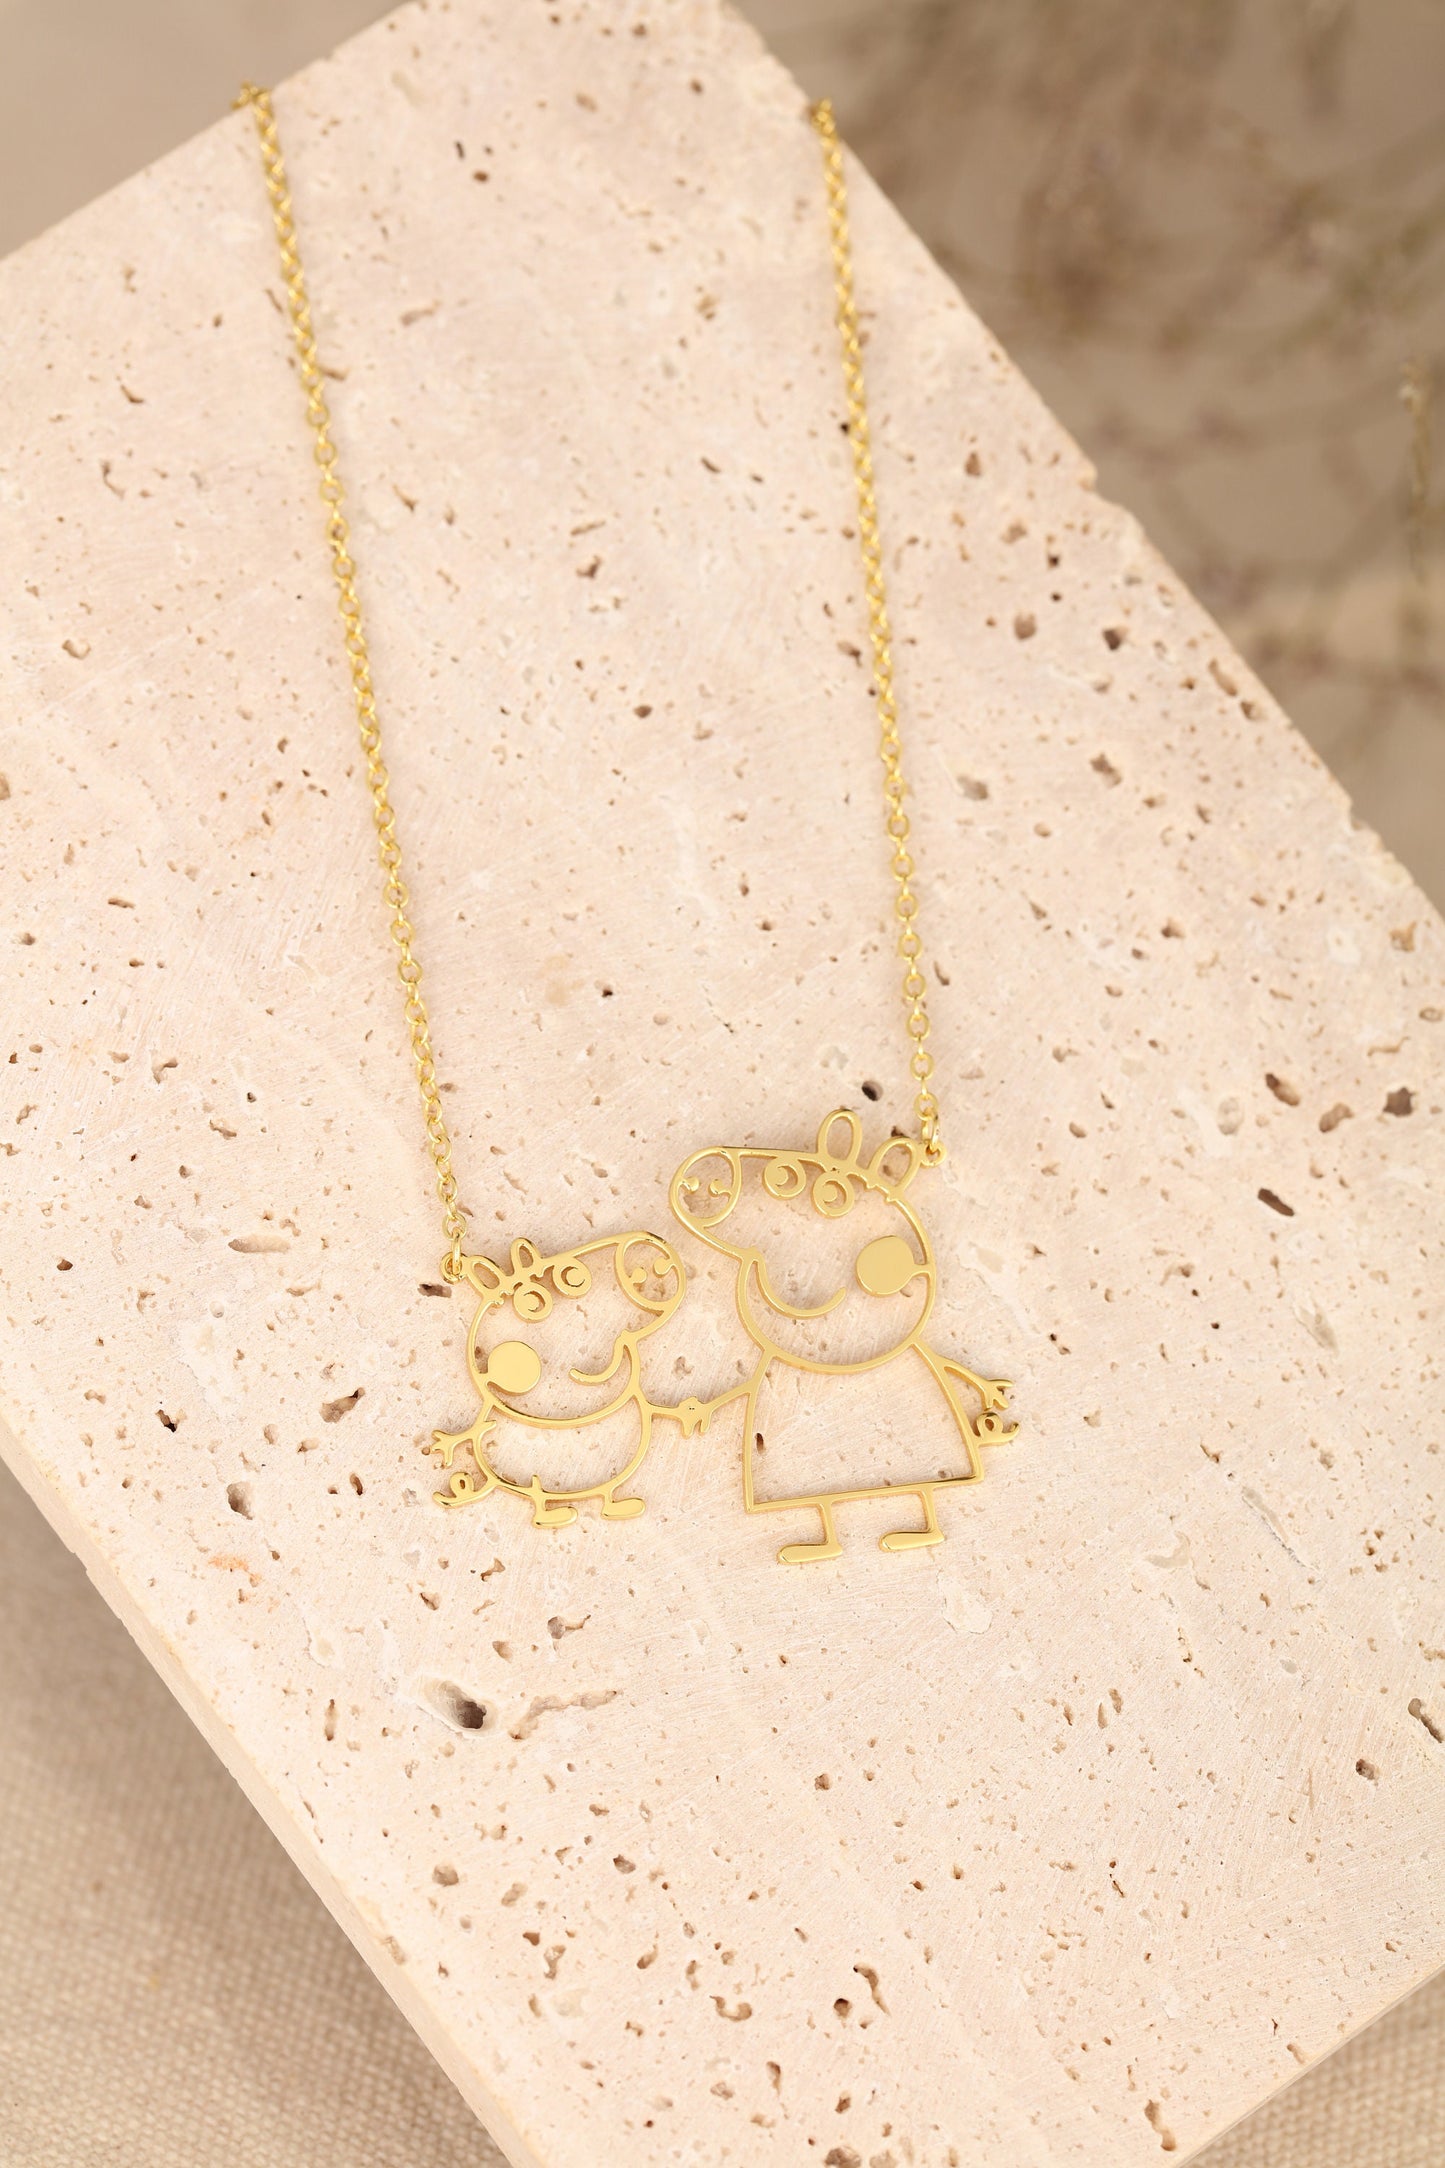 Children's Drawing Necklace in 18K Gold: Cherished Memories in Jewelry